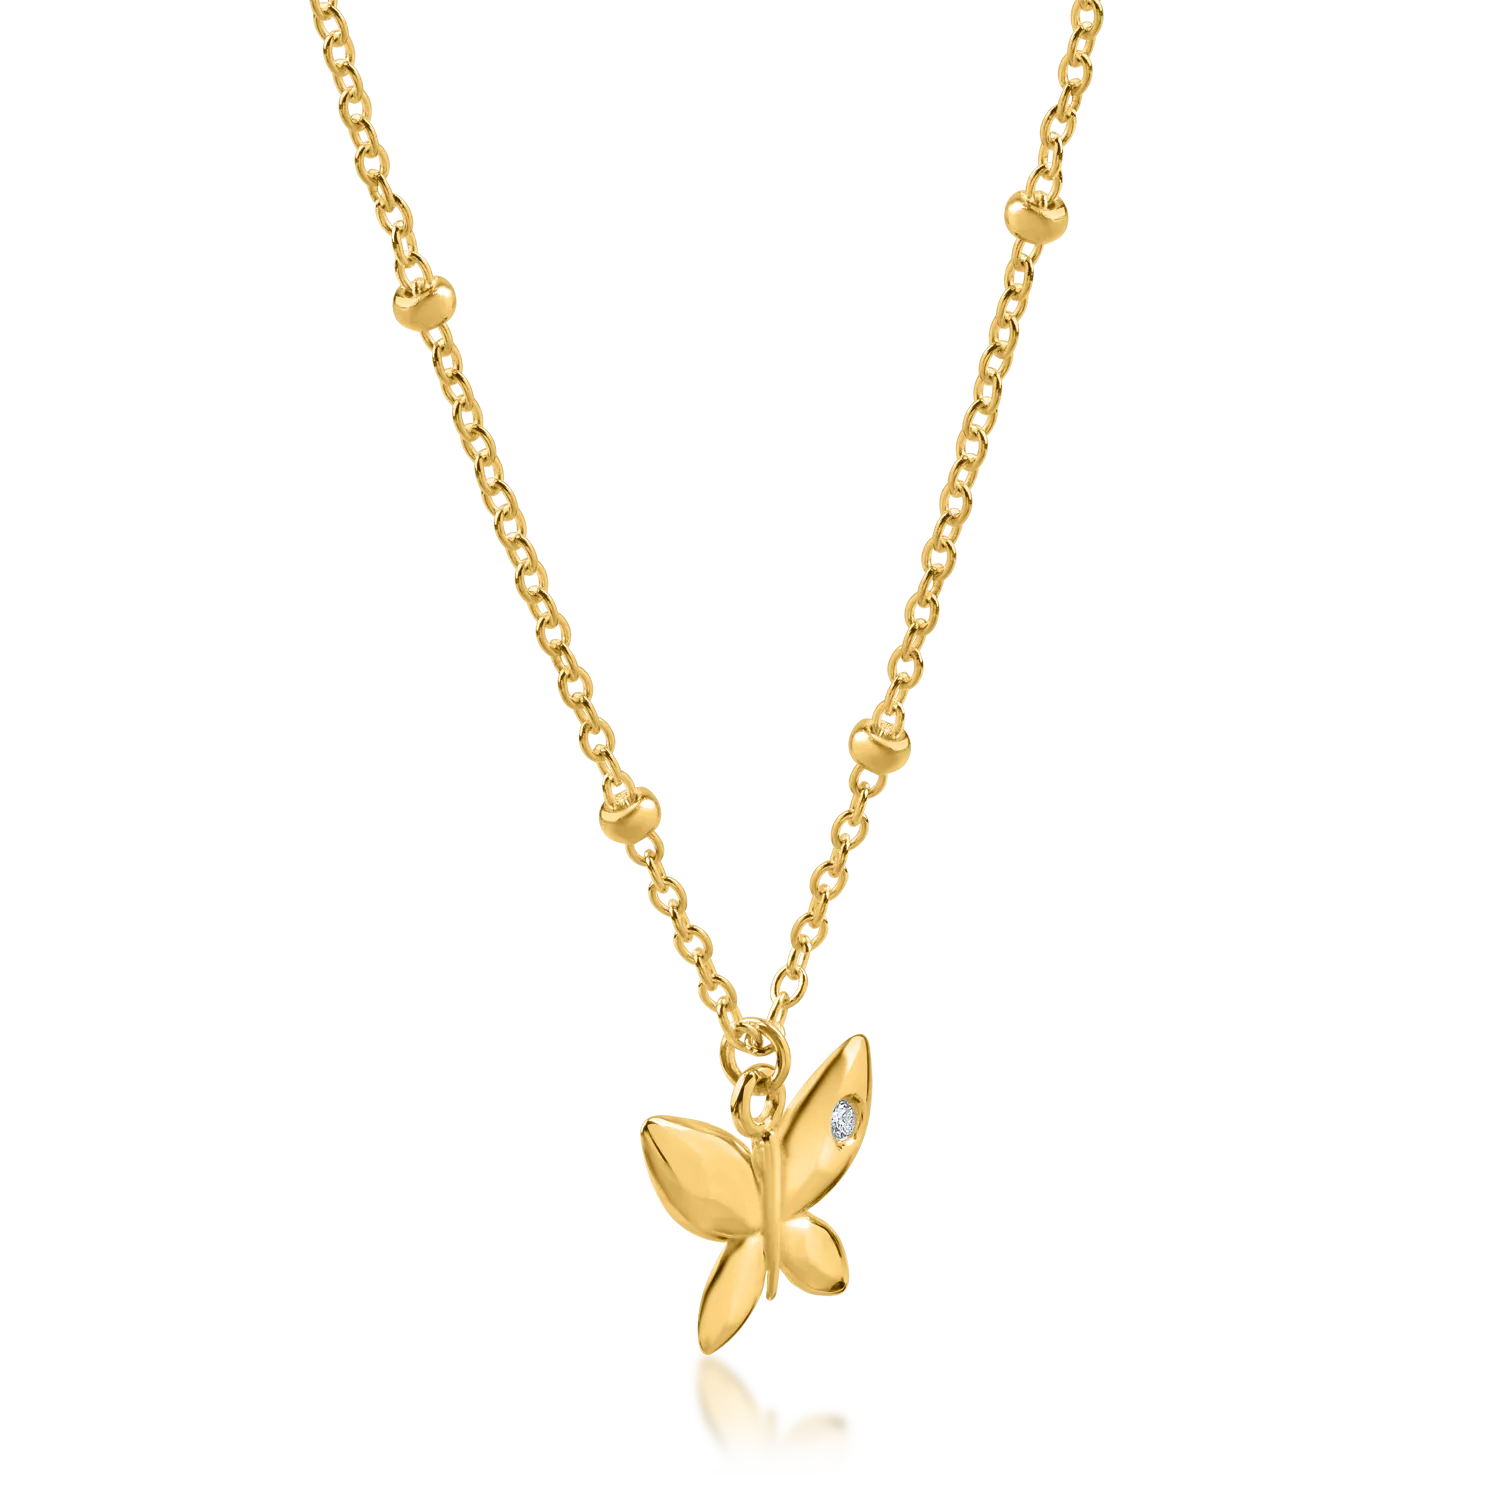 Yellow gold butterfly pendant necklace with 0.006ct diamond